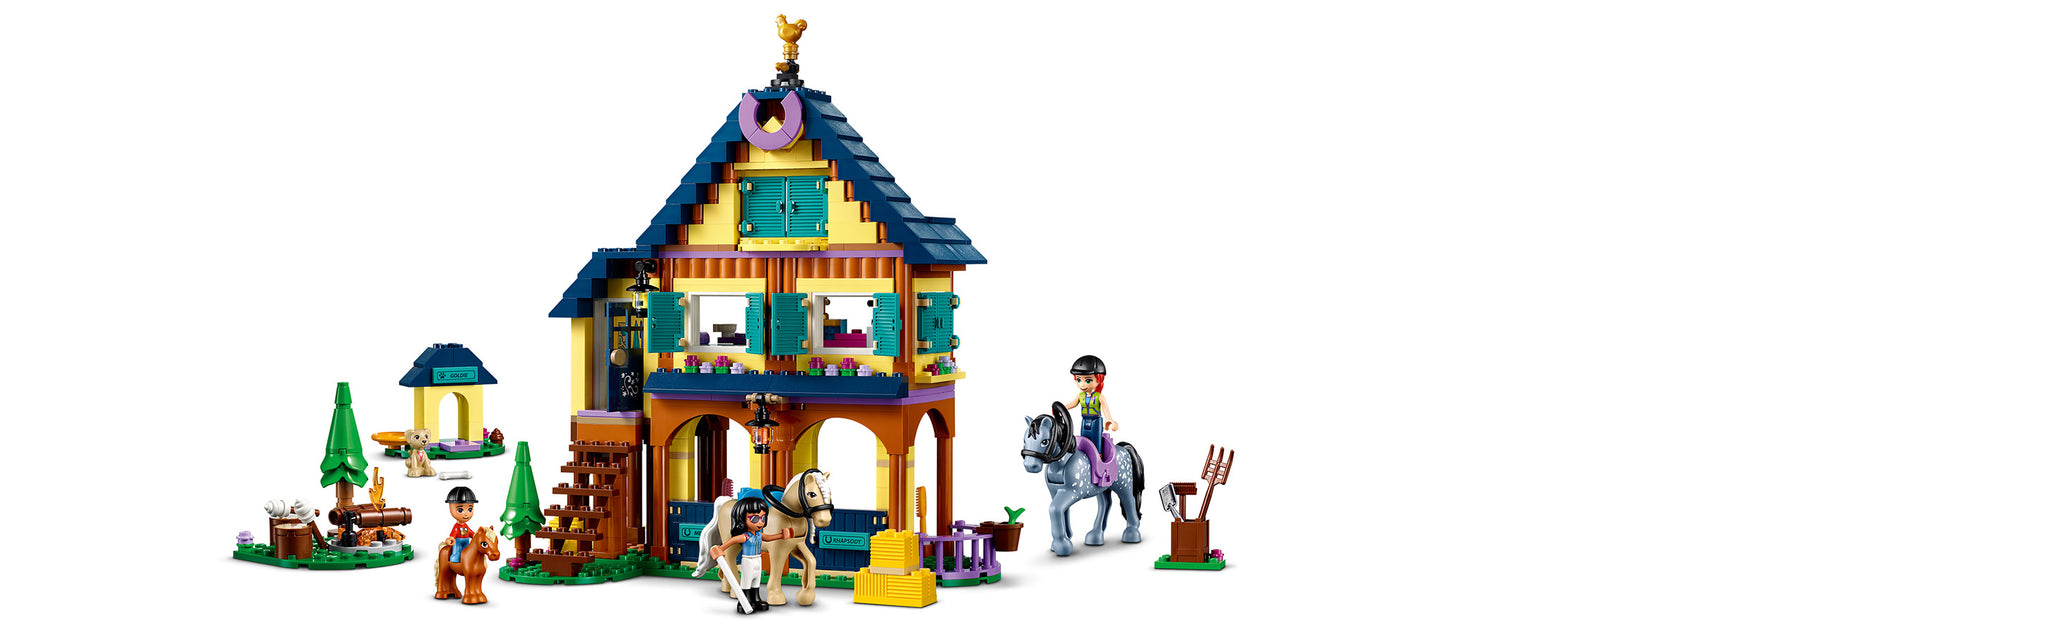 LEGO 41683 Horse riding base in the forest Riding school